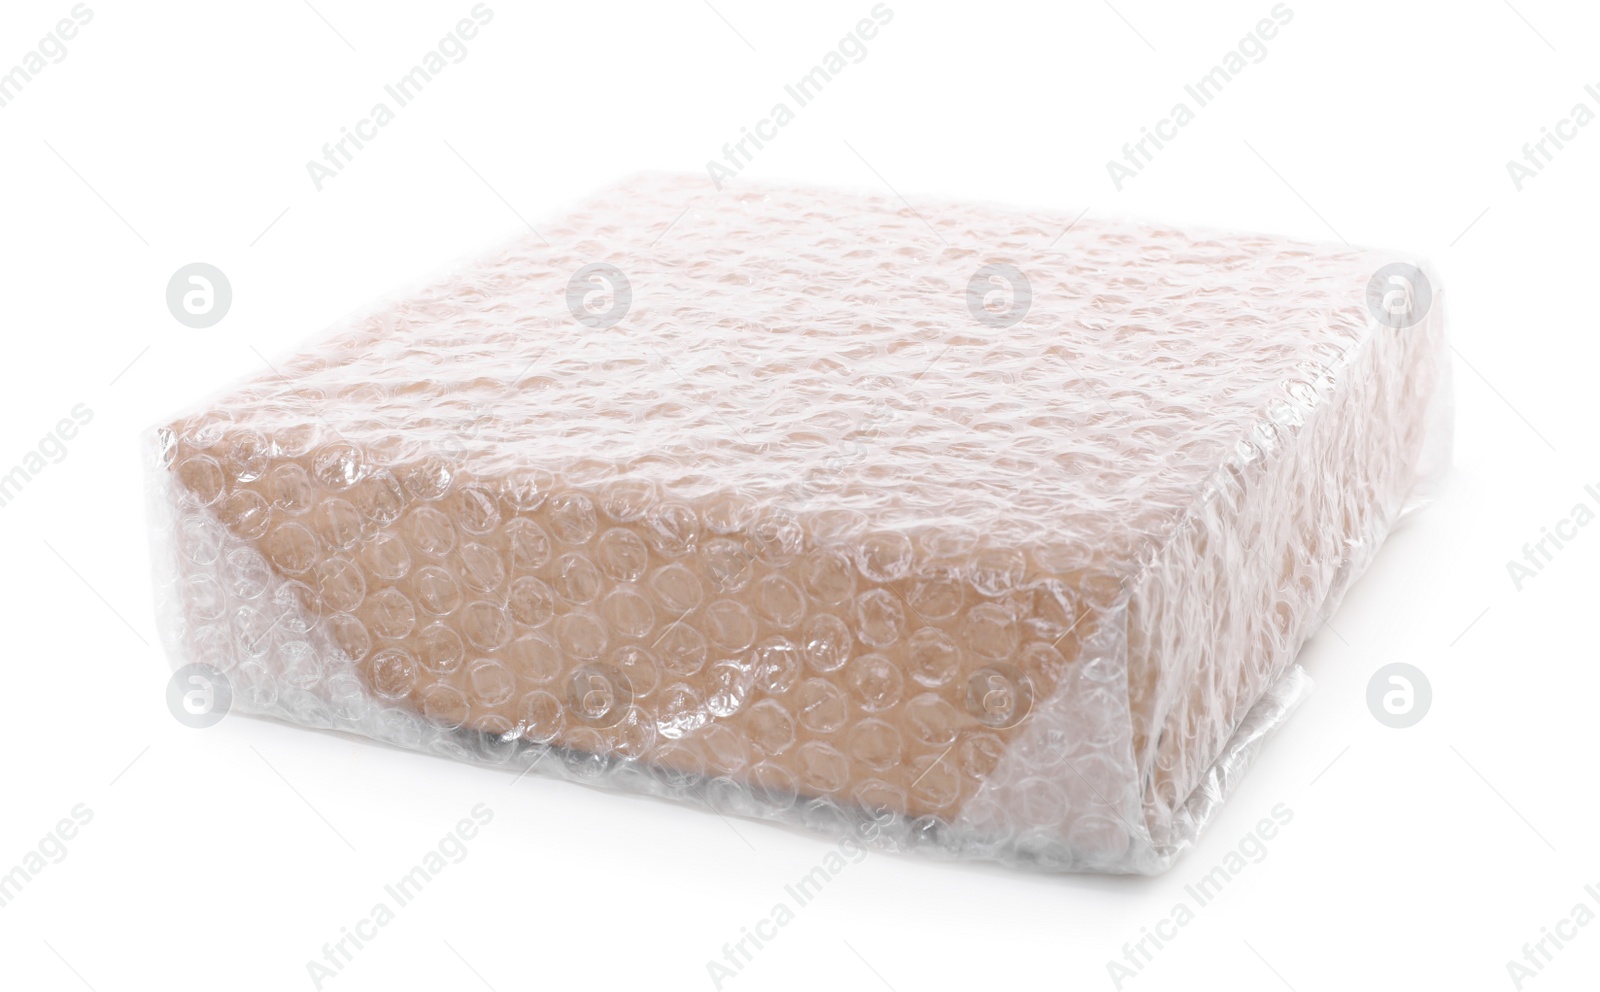 Photo of Cardboard box packed in bubble wrap isolated on white